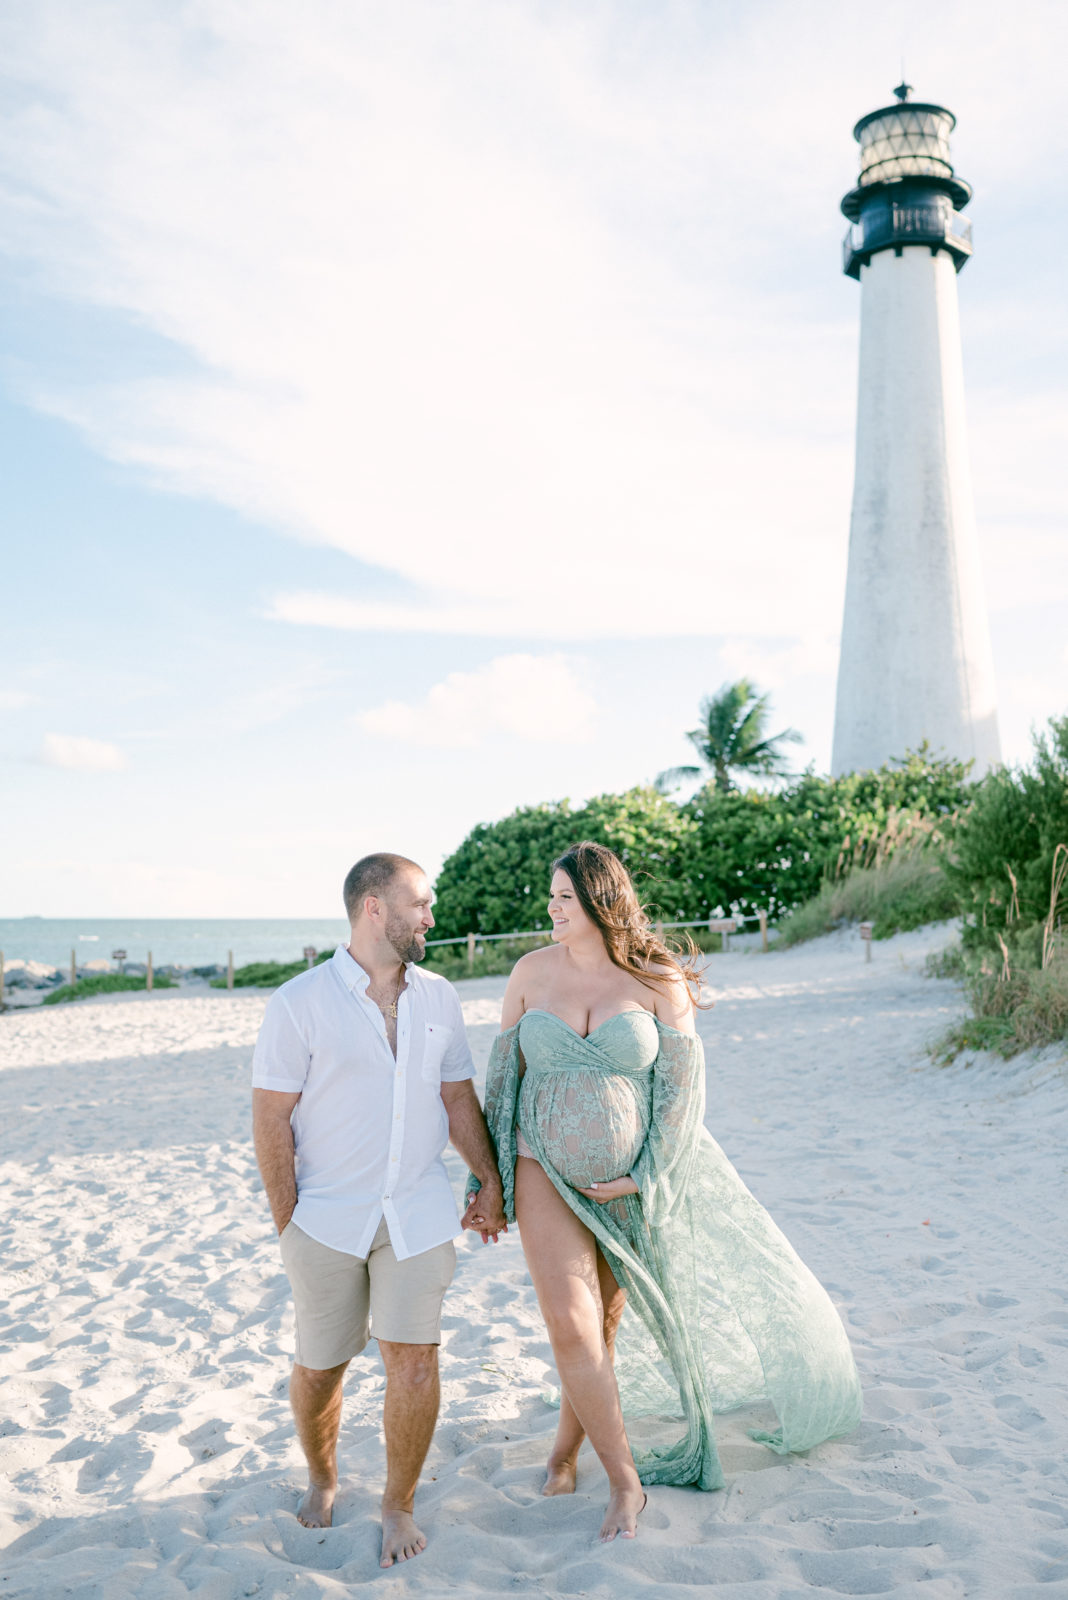 Expecting couple walking on the beach with the lighthouse in the back